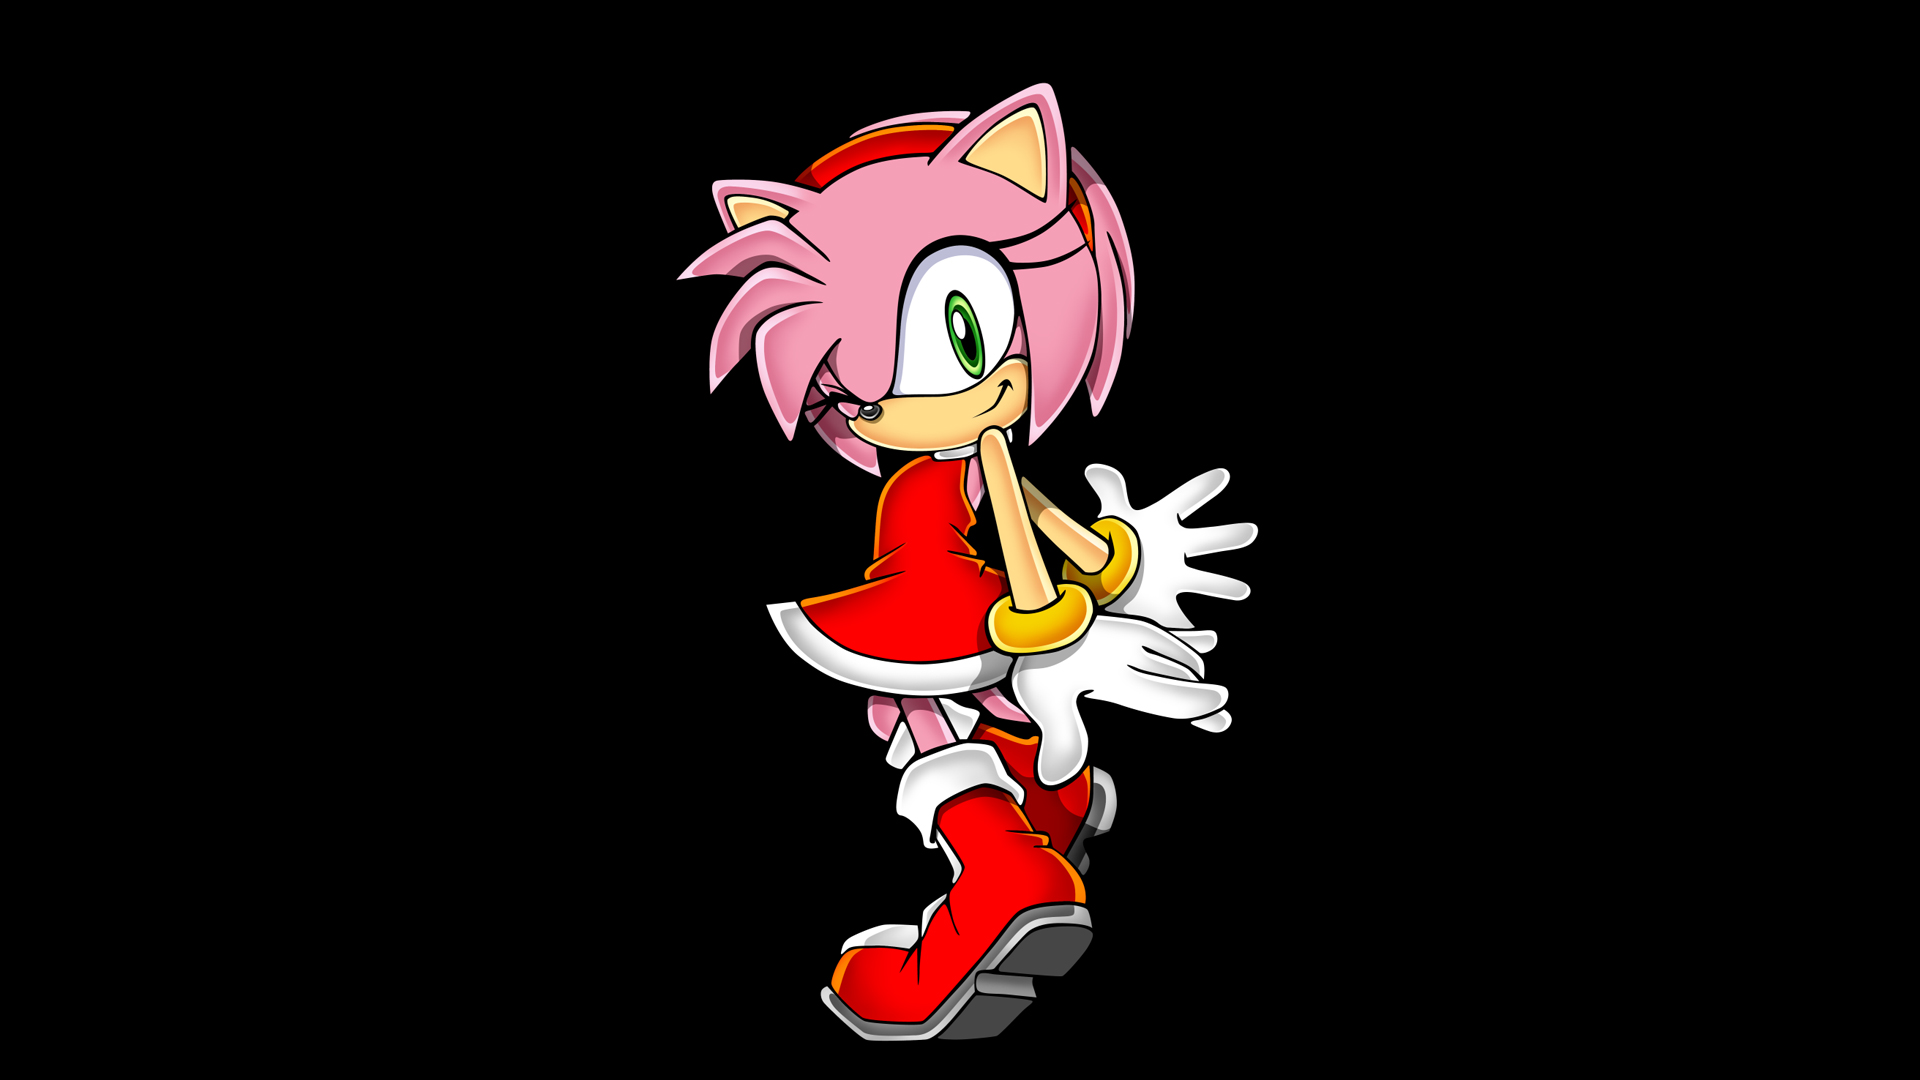 Amy Rose Image Wallpaper Resolution